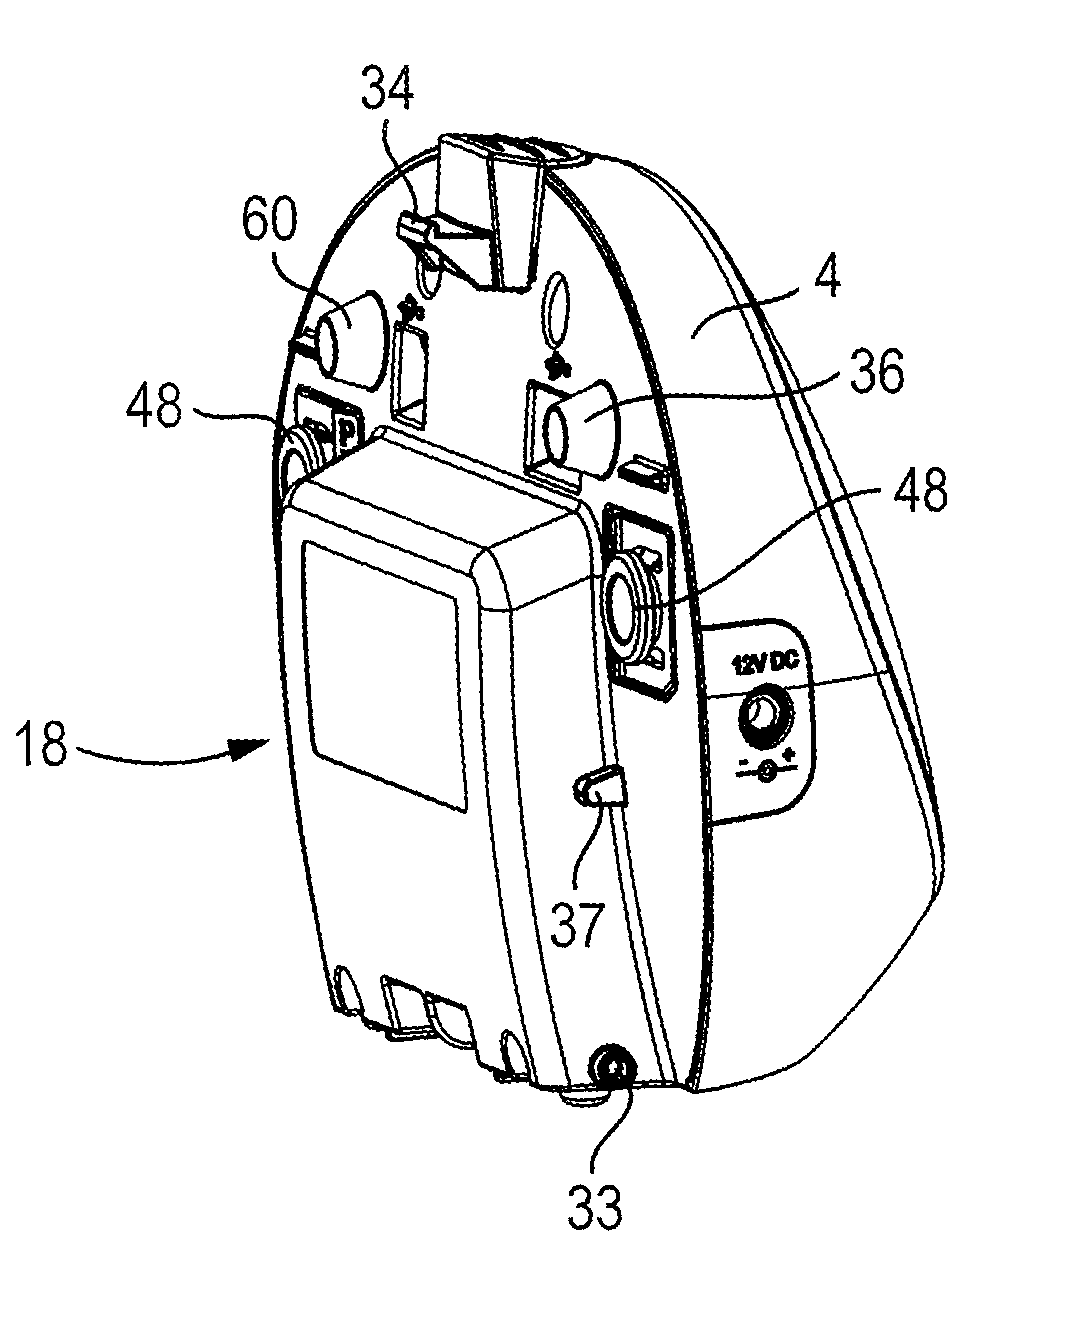 Vacuum generation device for vacuum treatment of wounds